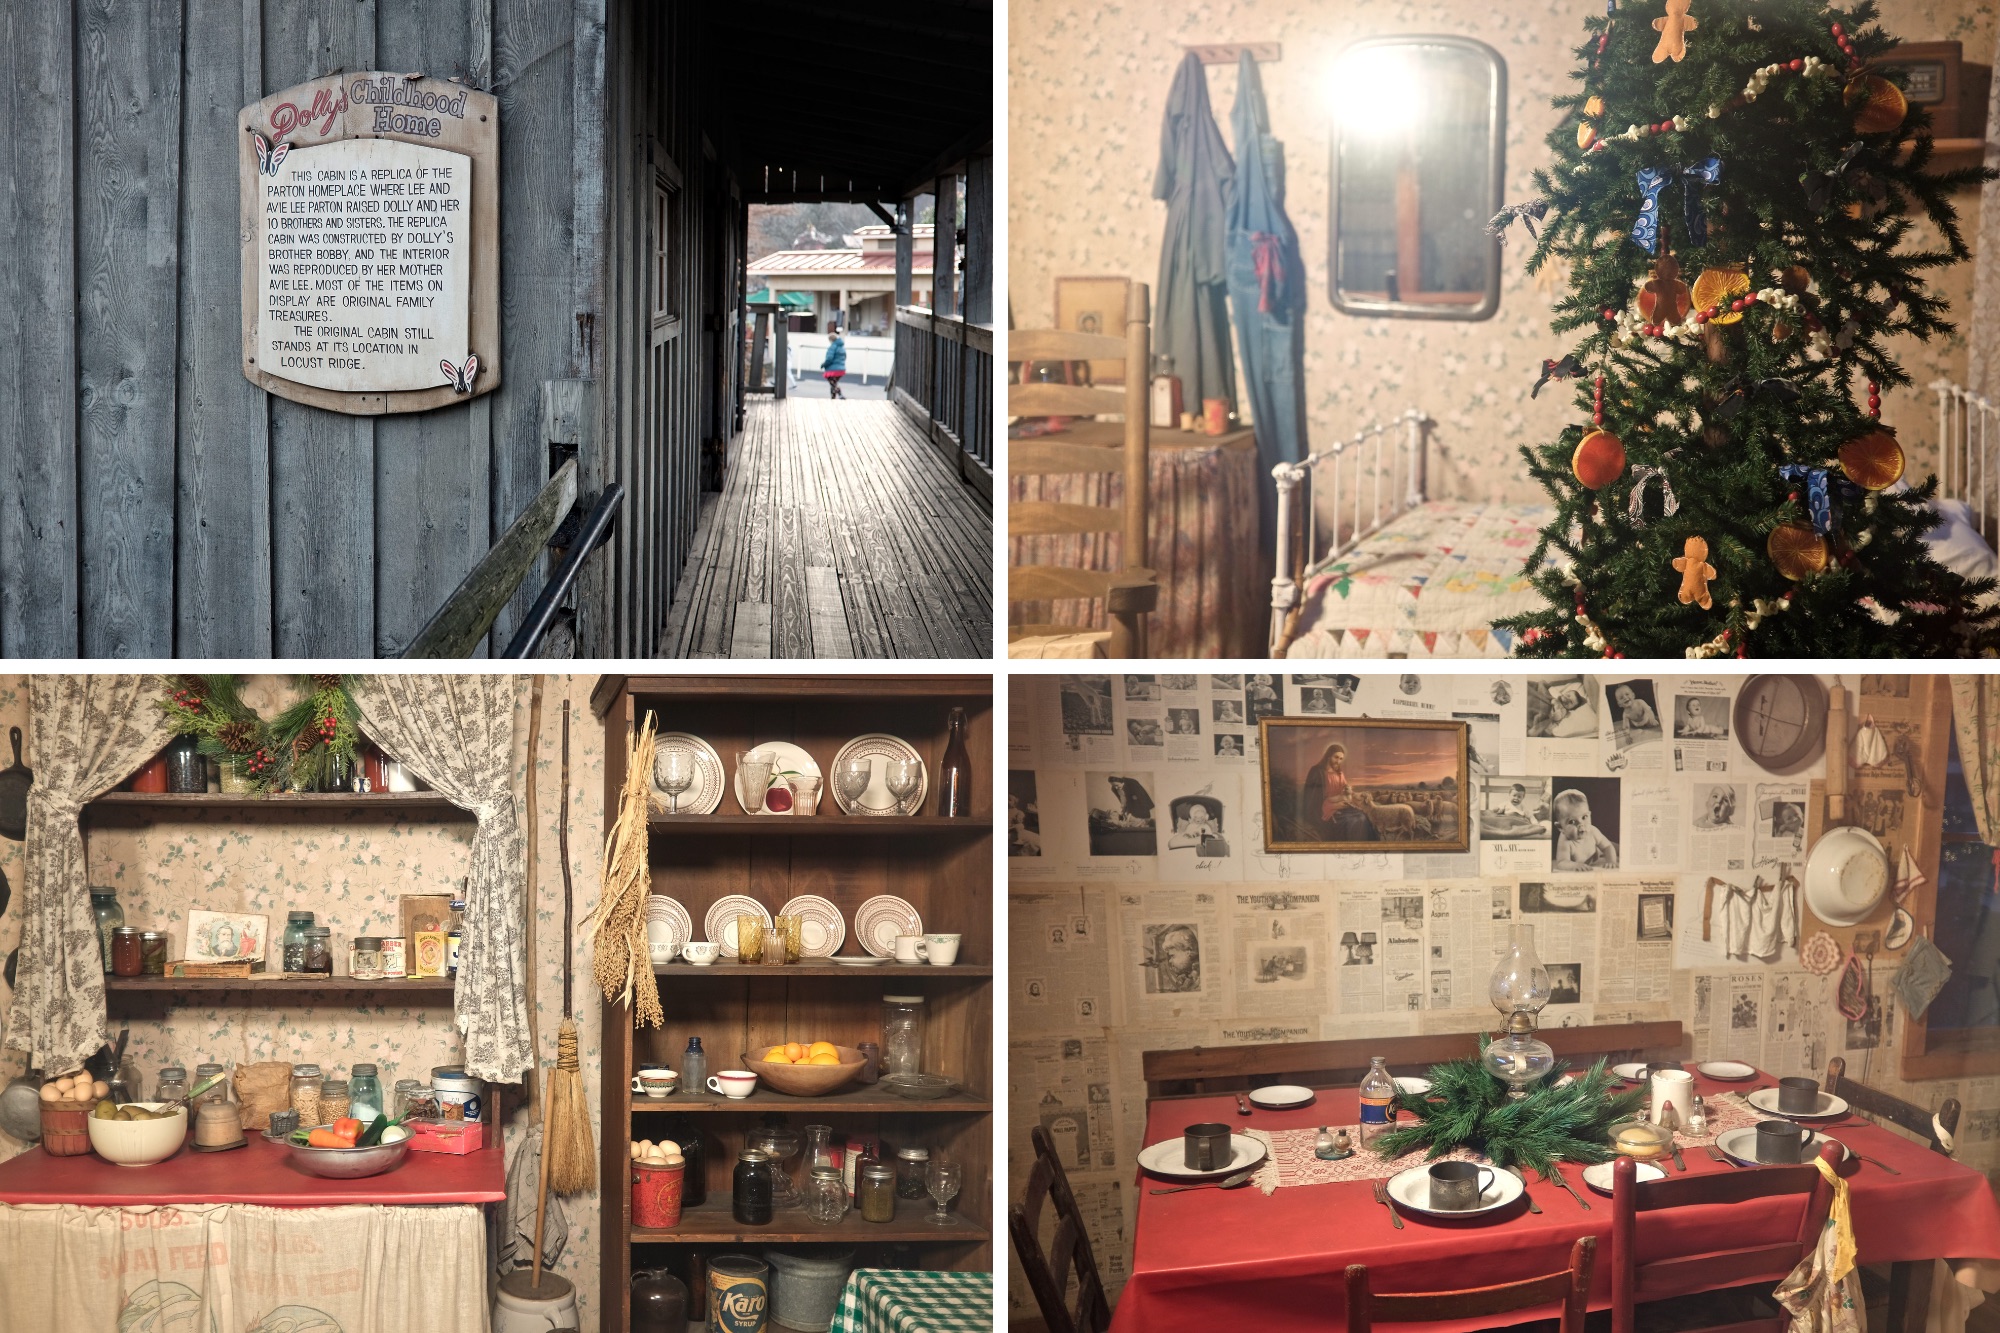 Four images of the replica childhood home of Dolly Parton at Dollywood